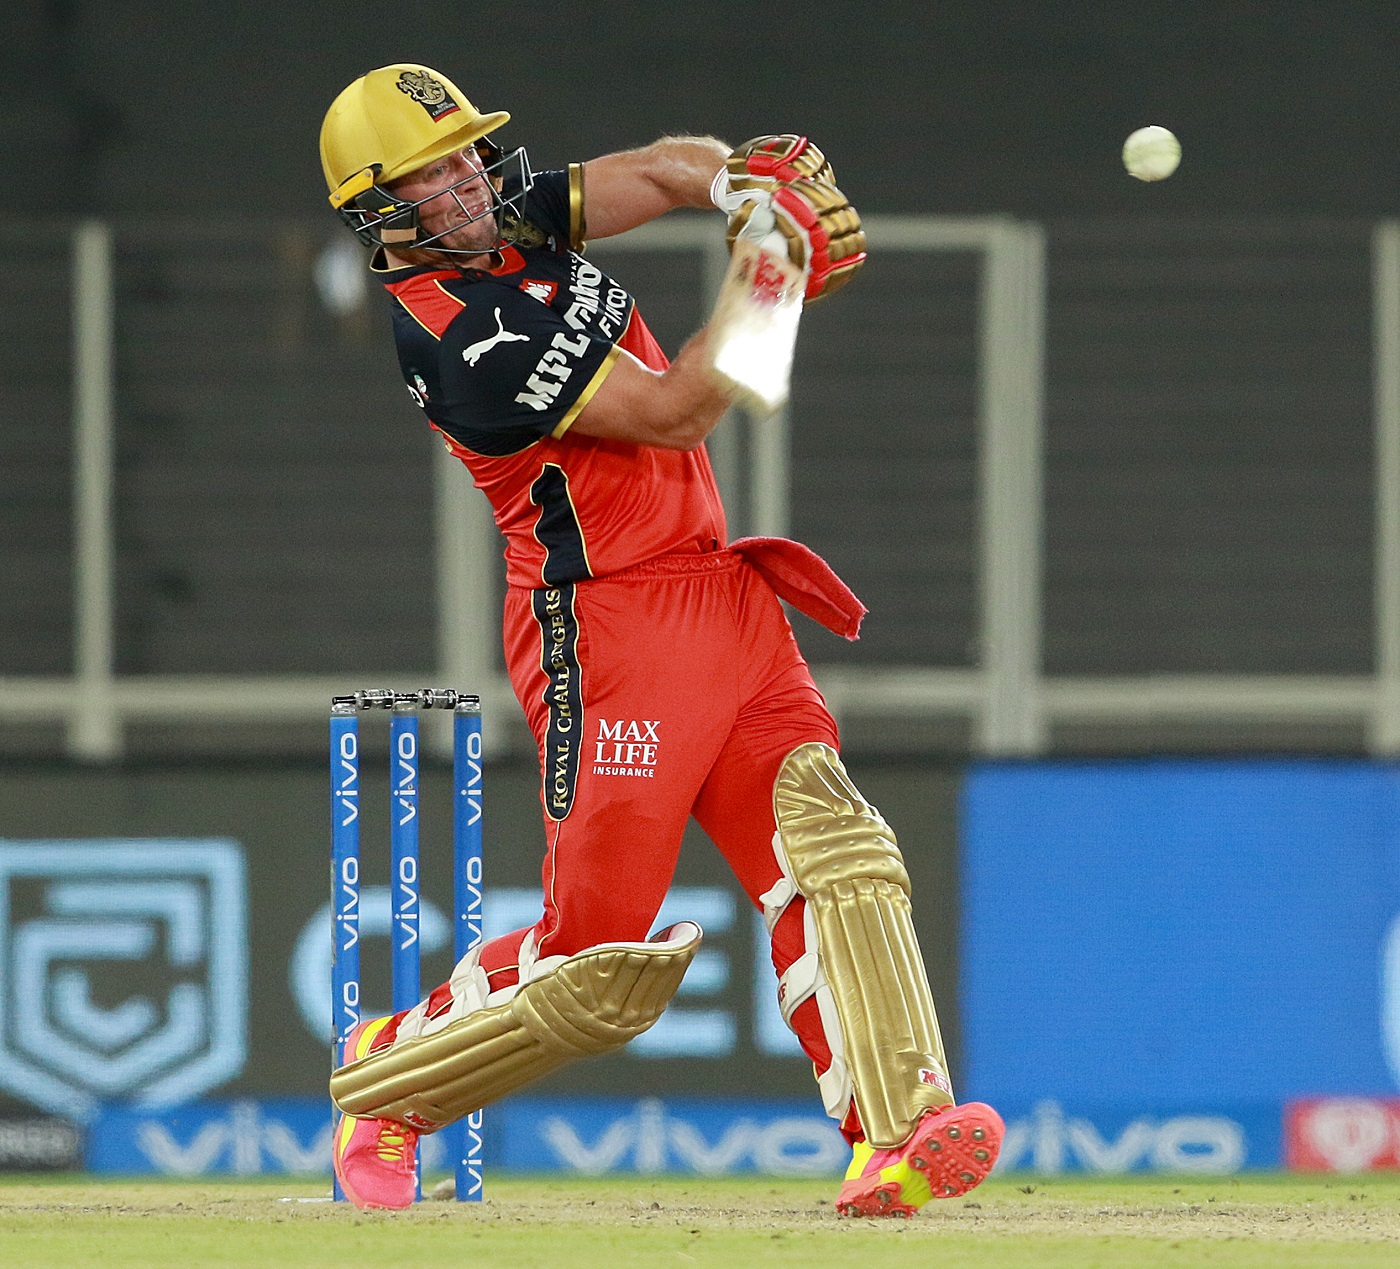 AB de Villiers slammed 5 sixes and 3 fours in his 75* | BCCI-IPL